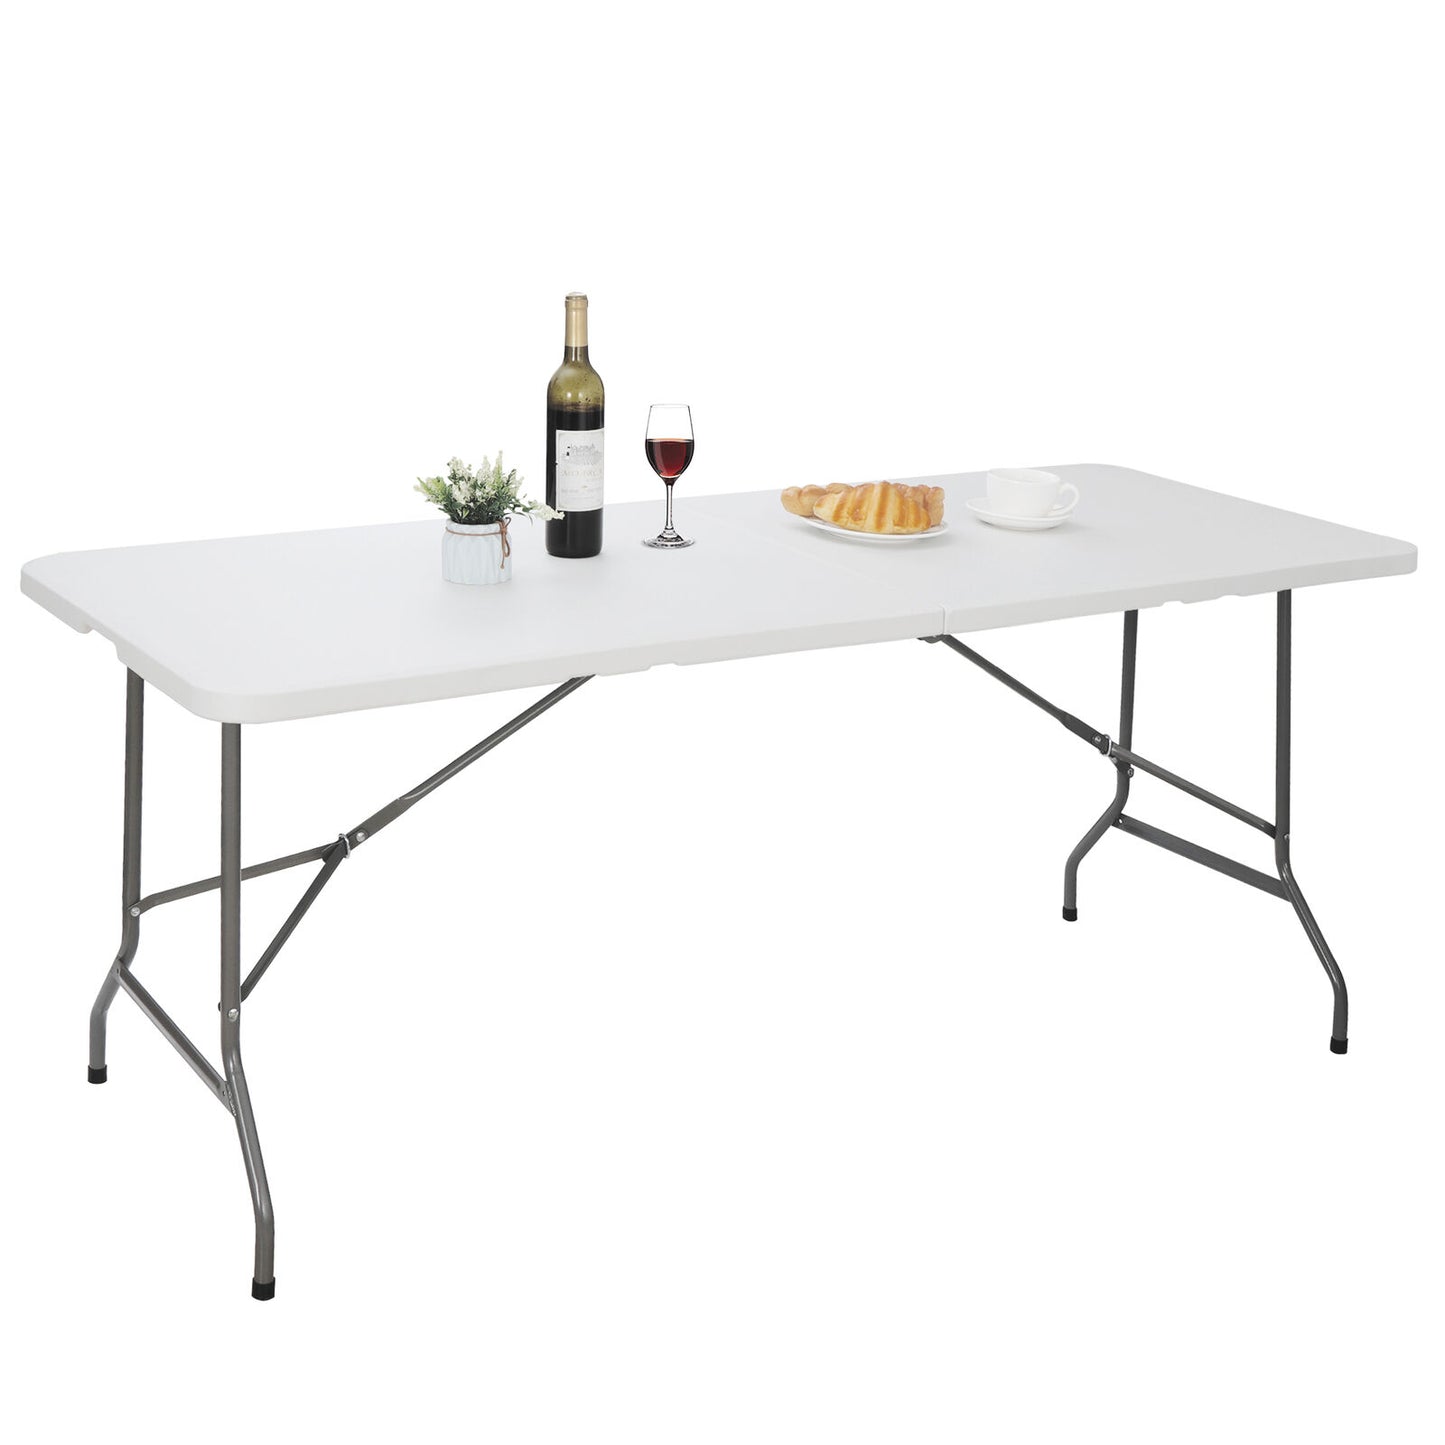 6FT Plastic Folding Table Portable Fold-in-Half Picnic Utility Table with Handle